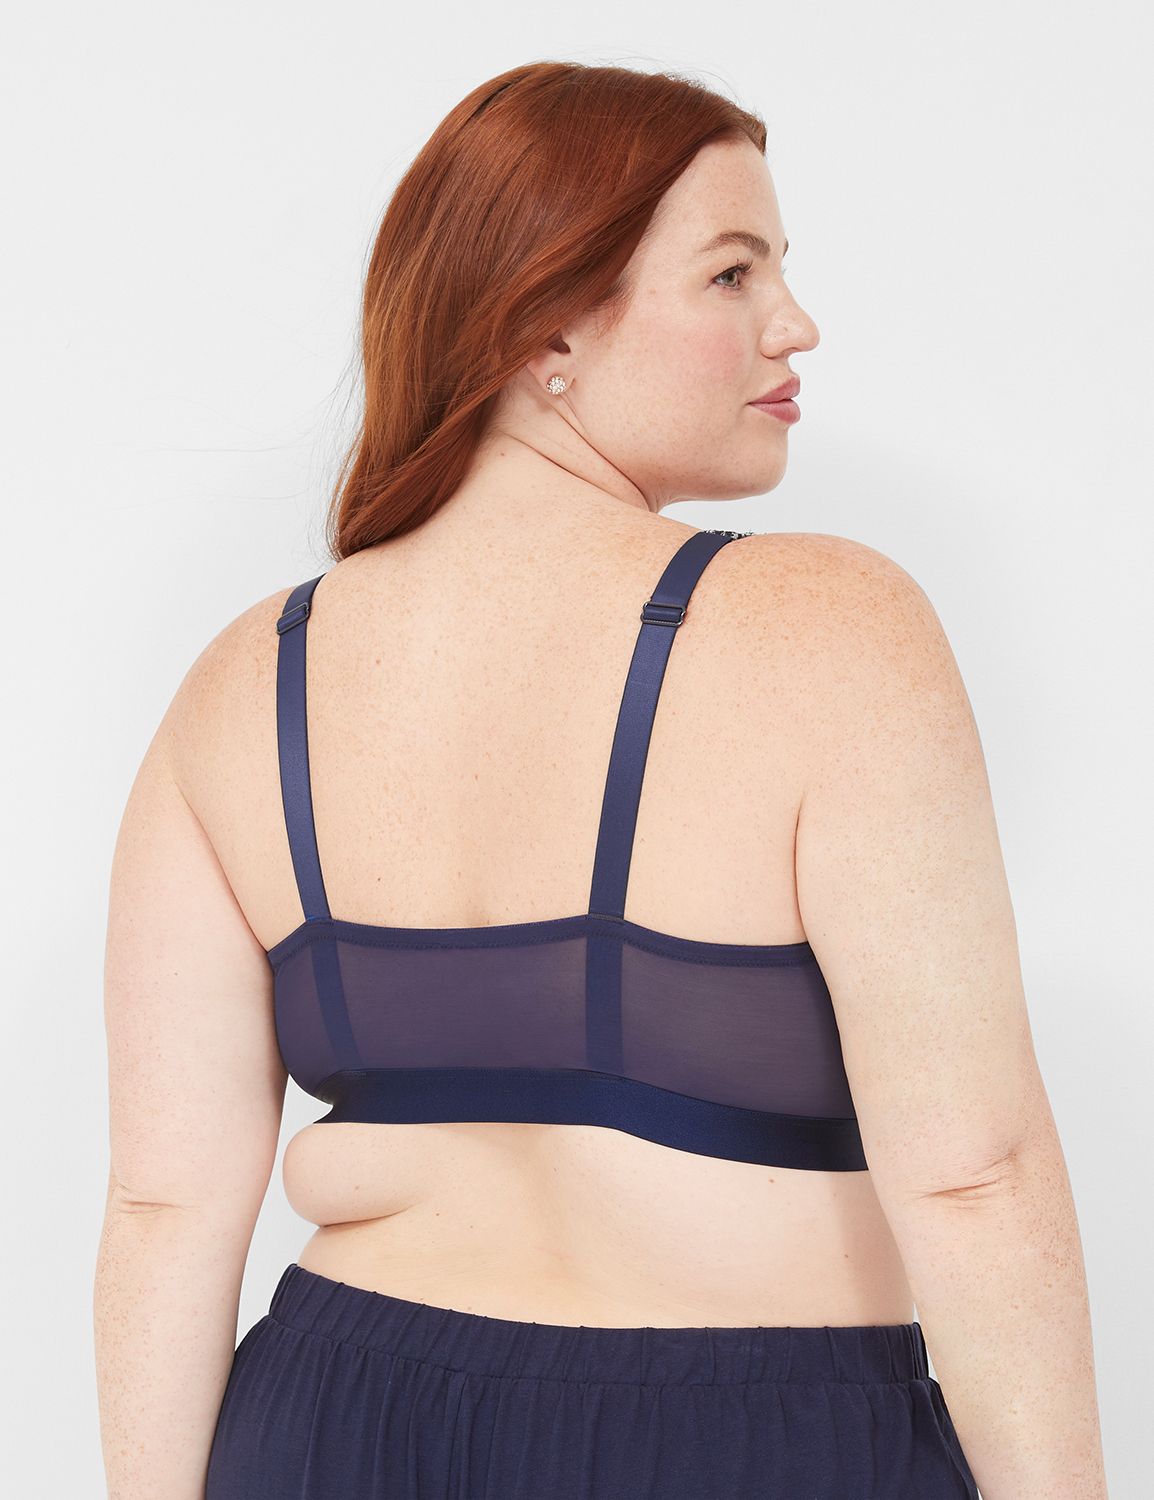 Size 22-24 Supportive Plus Size Bras For Women